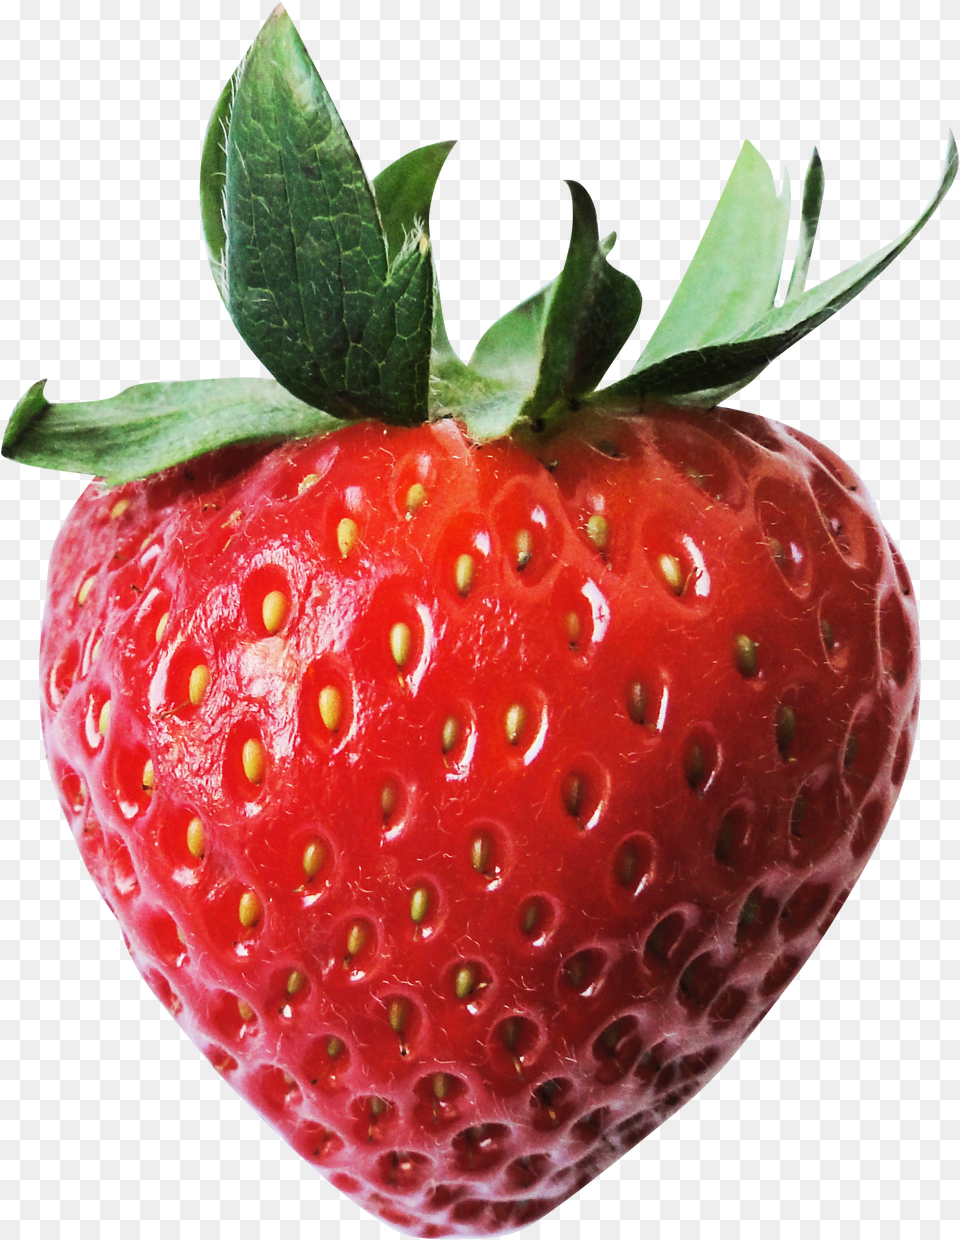 Red Juicy Strawberry Image Some People See Differently Png